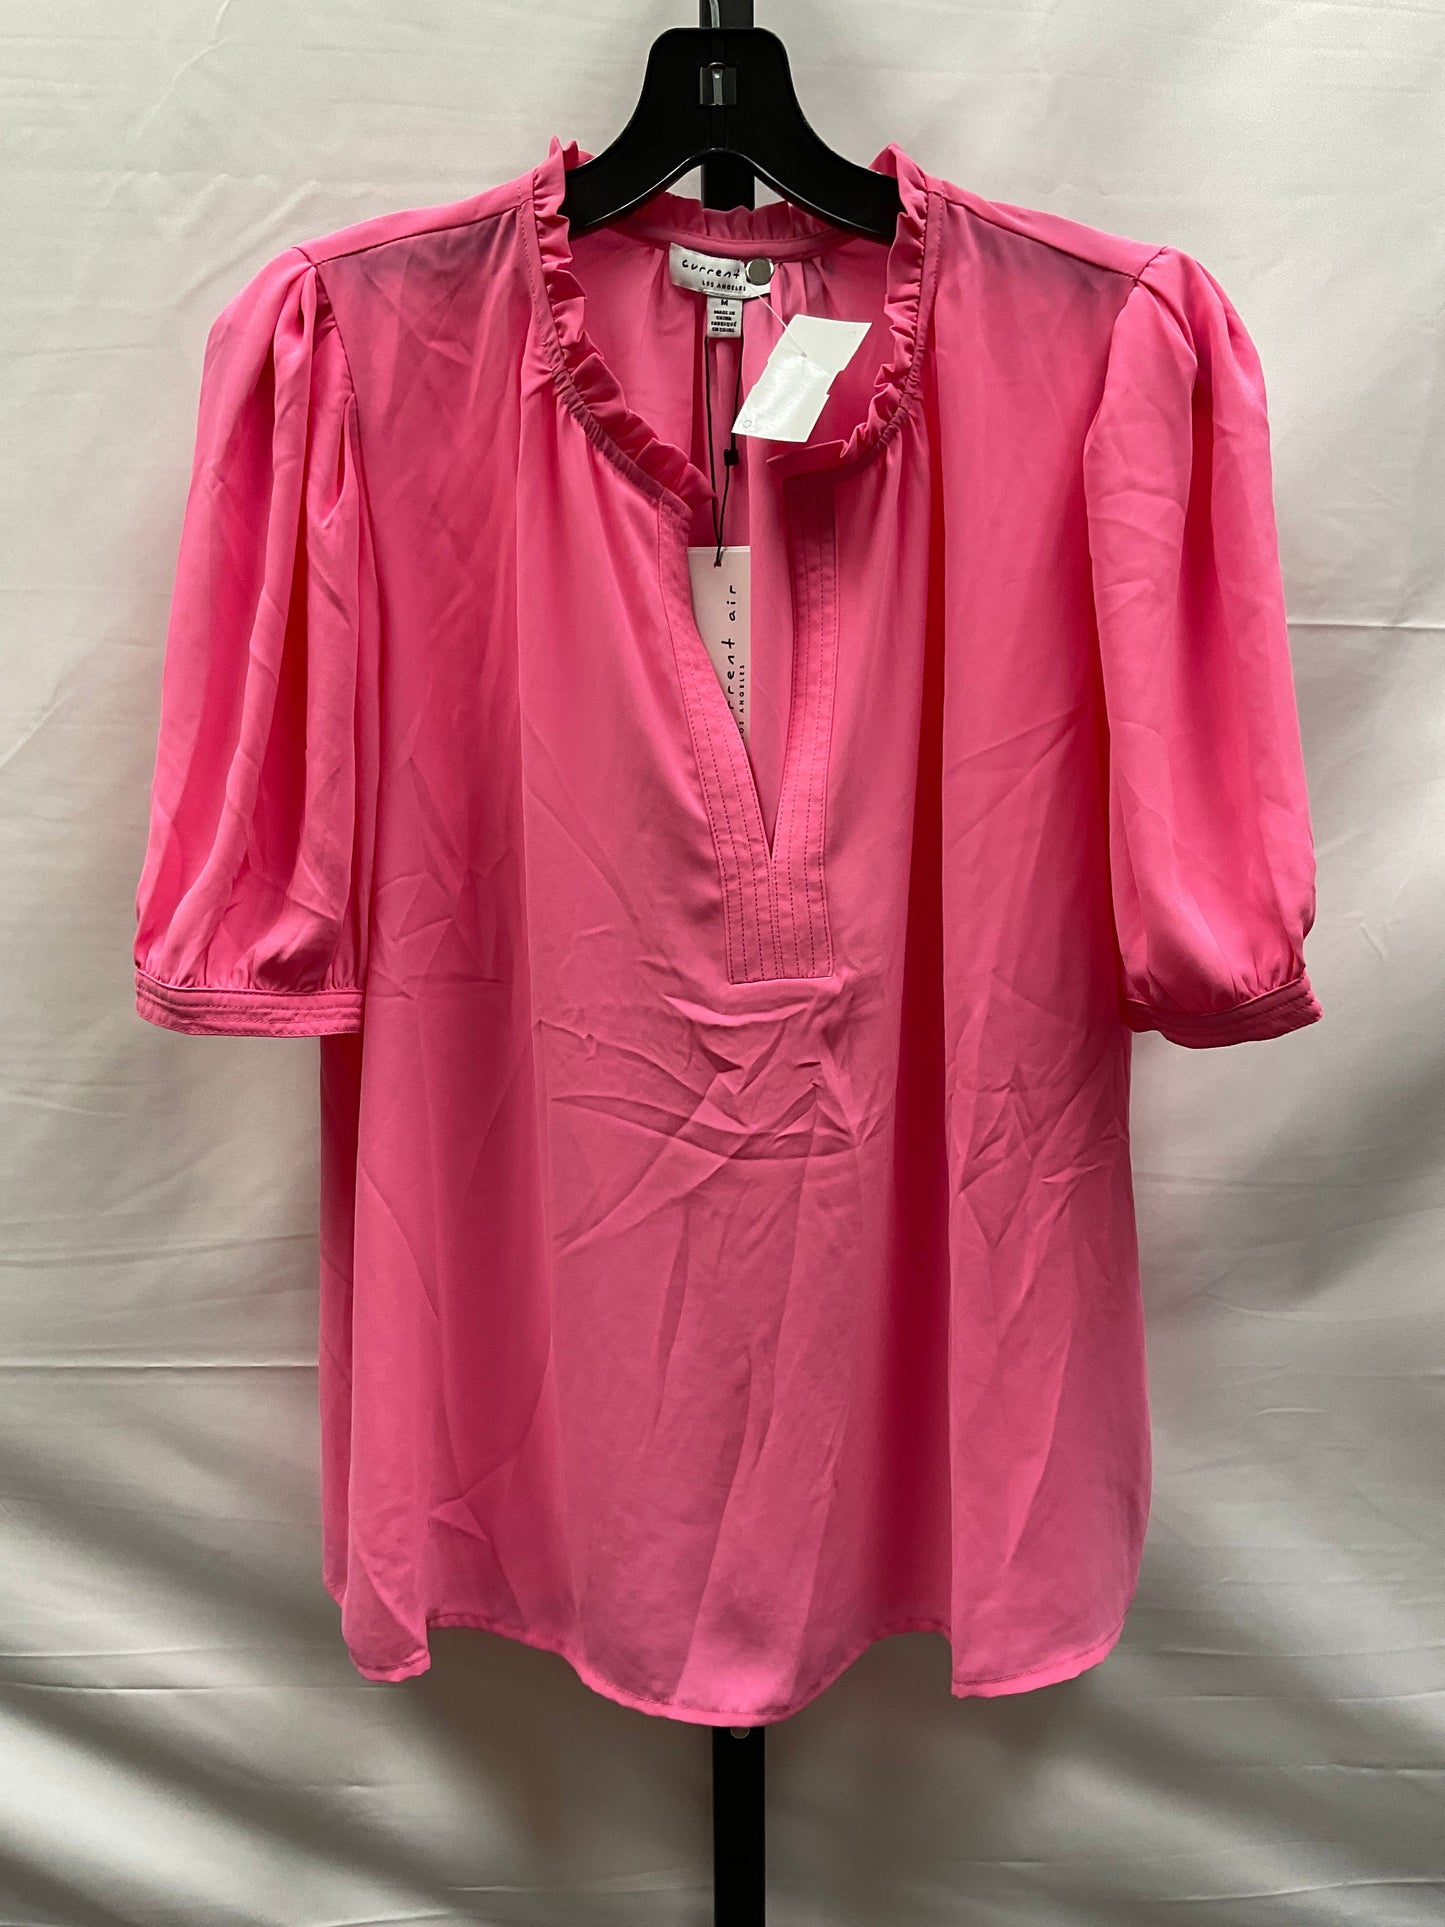 Pink Top Short Sleeve Current Air, Size M